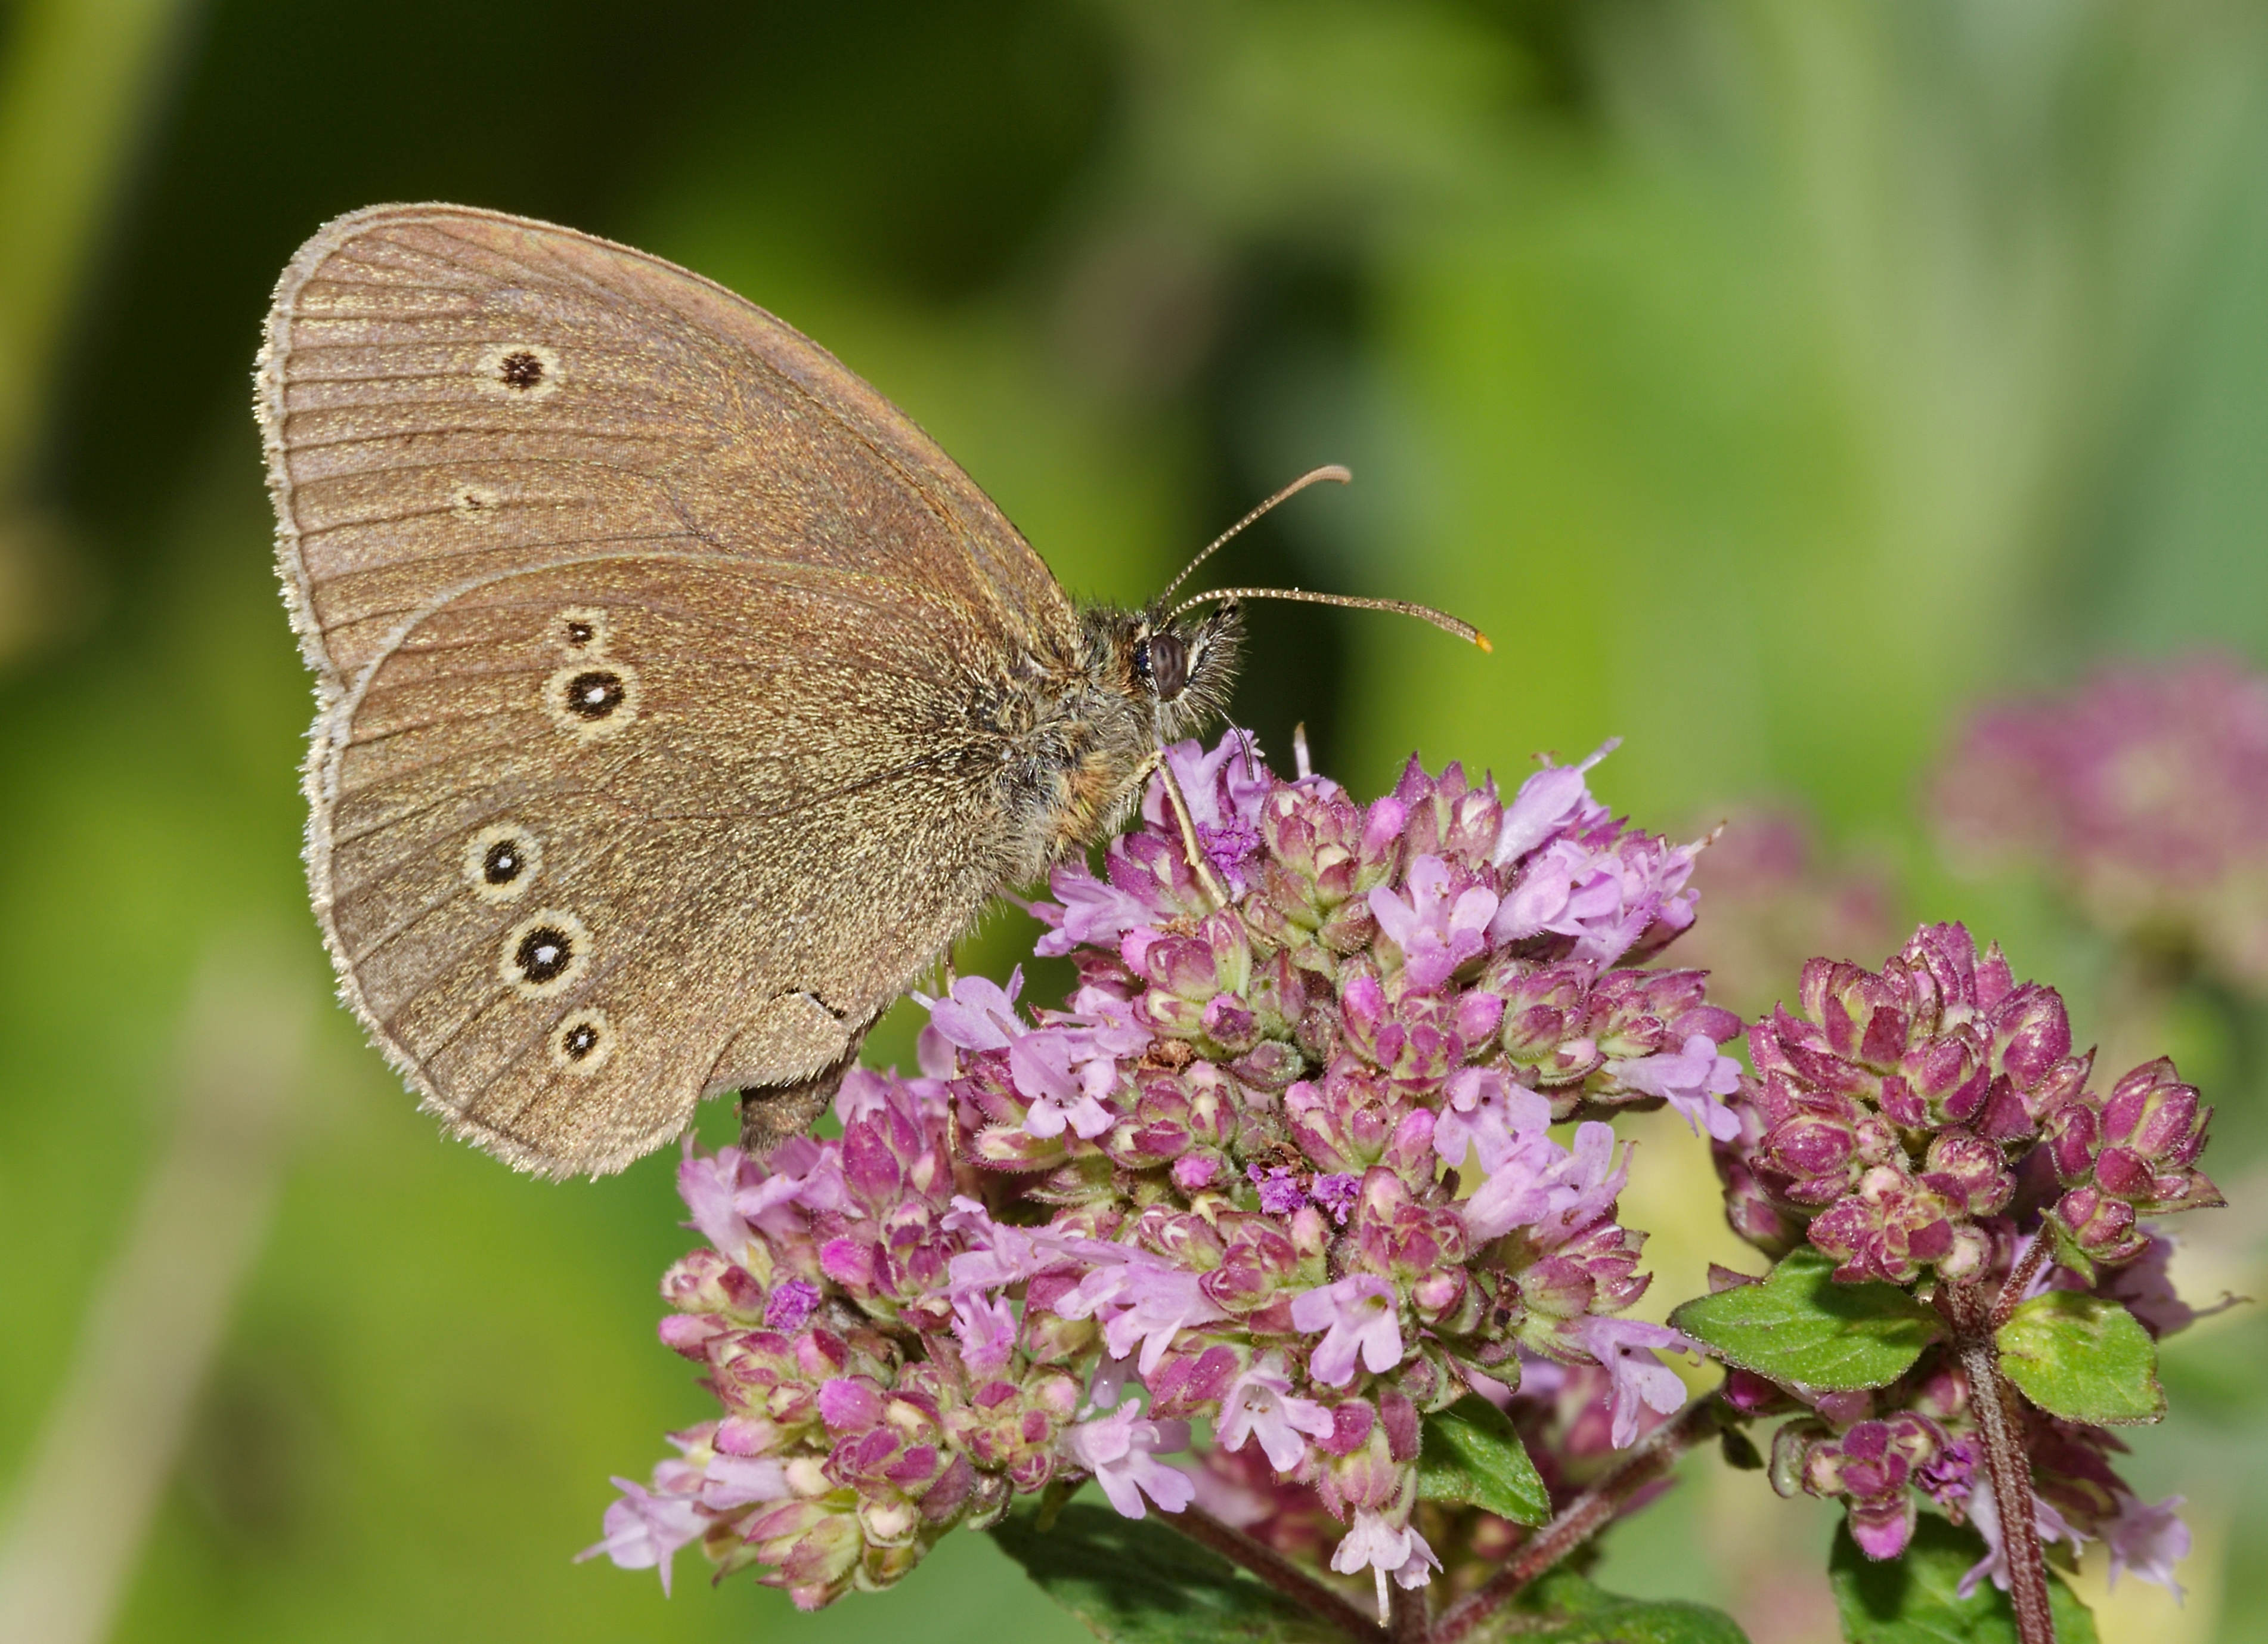 Ringlet on a Flower by Andreas Eichler